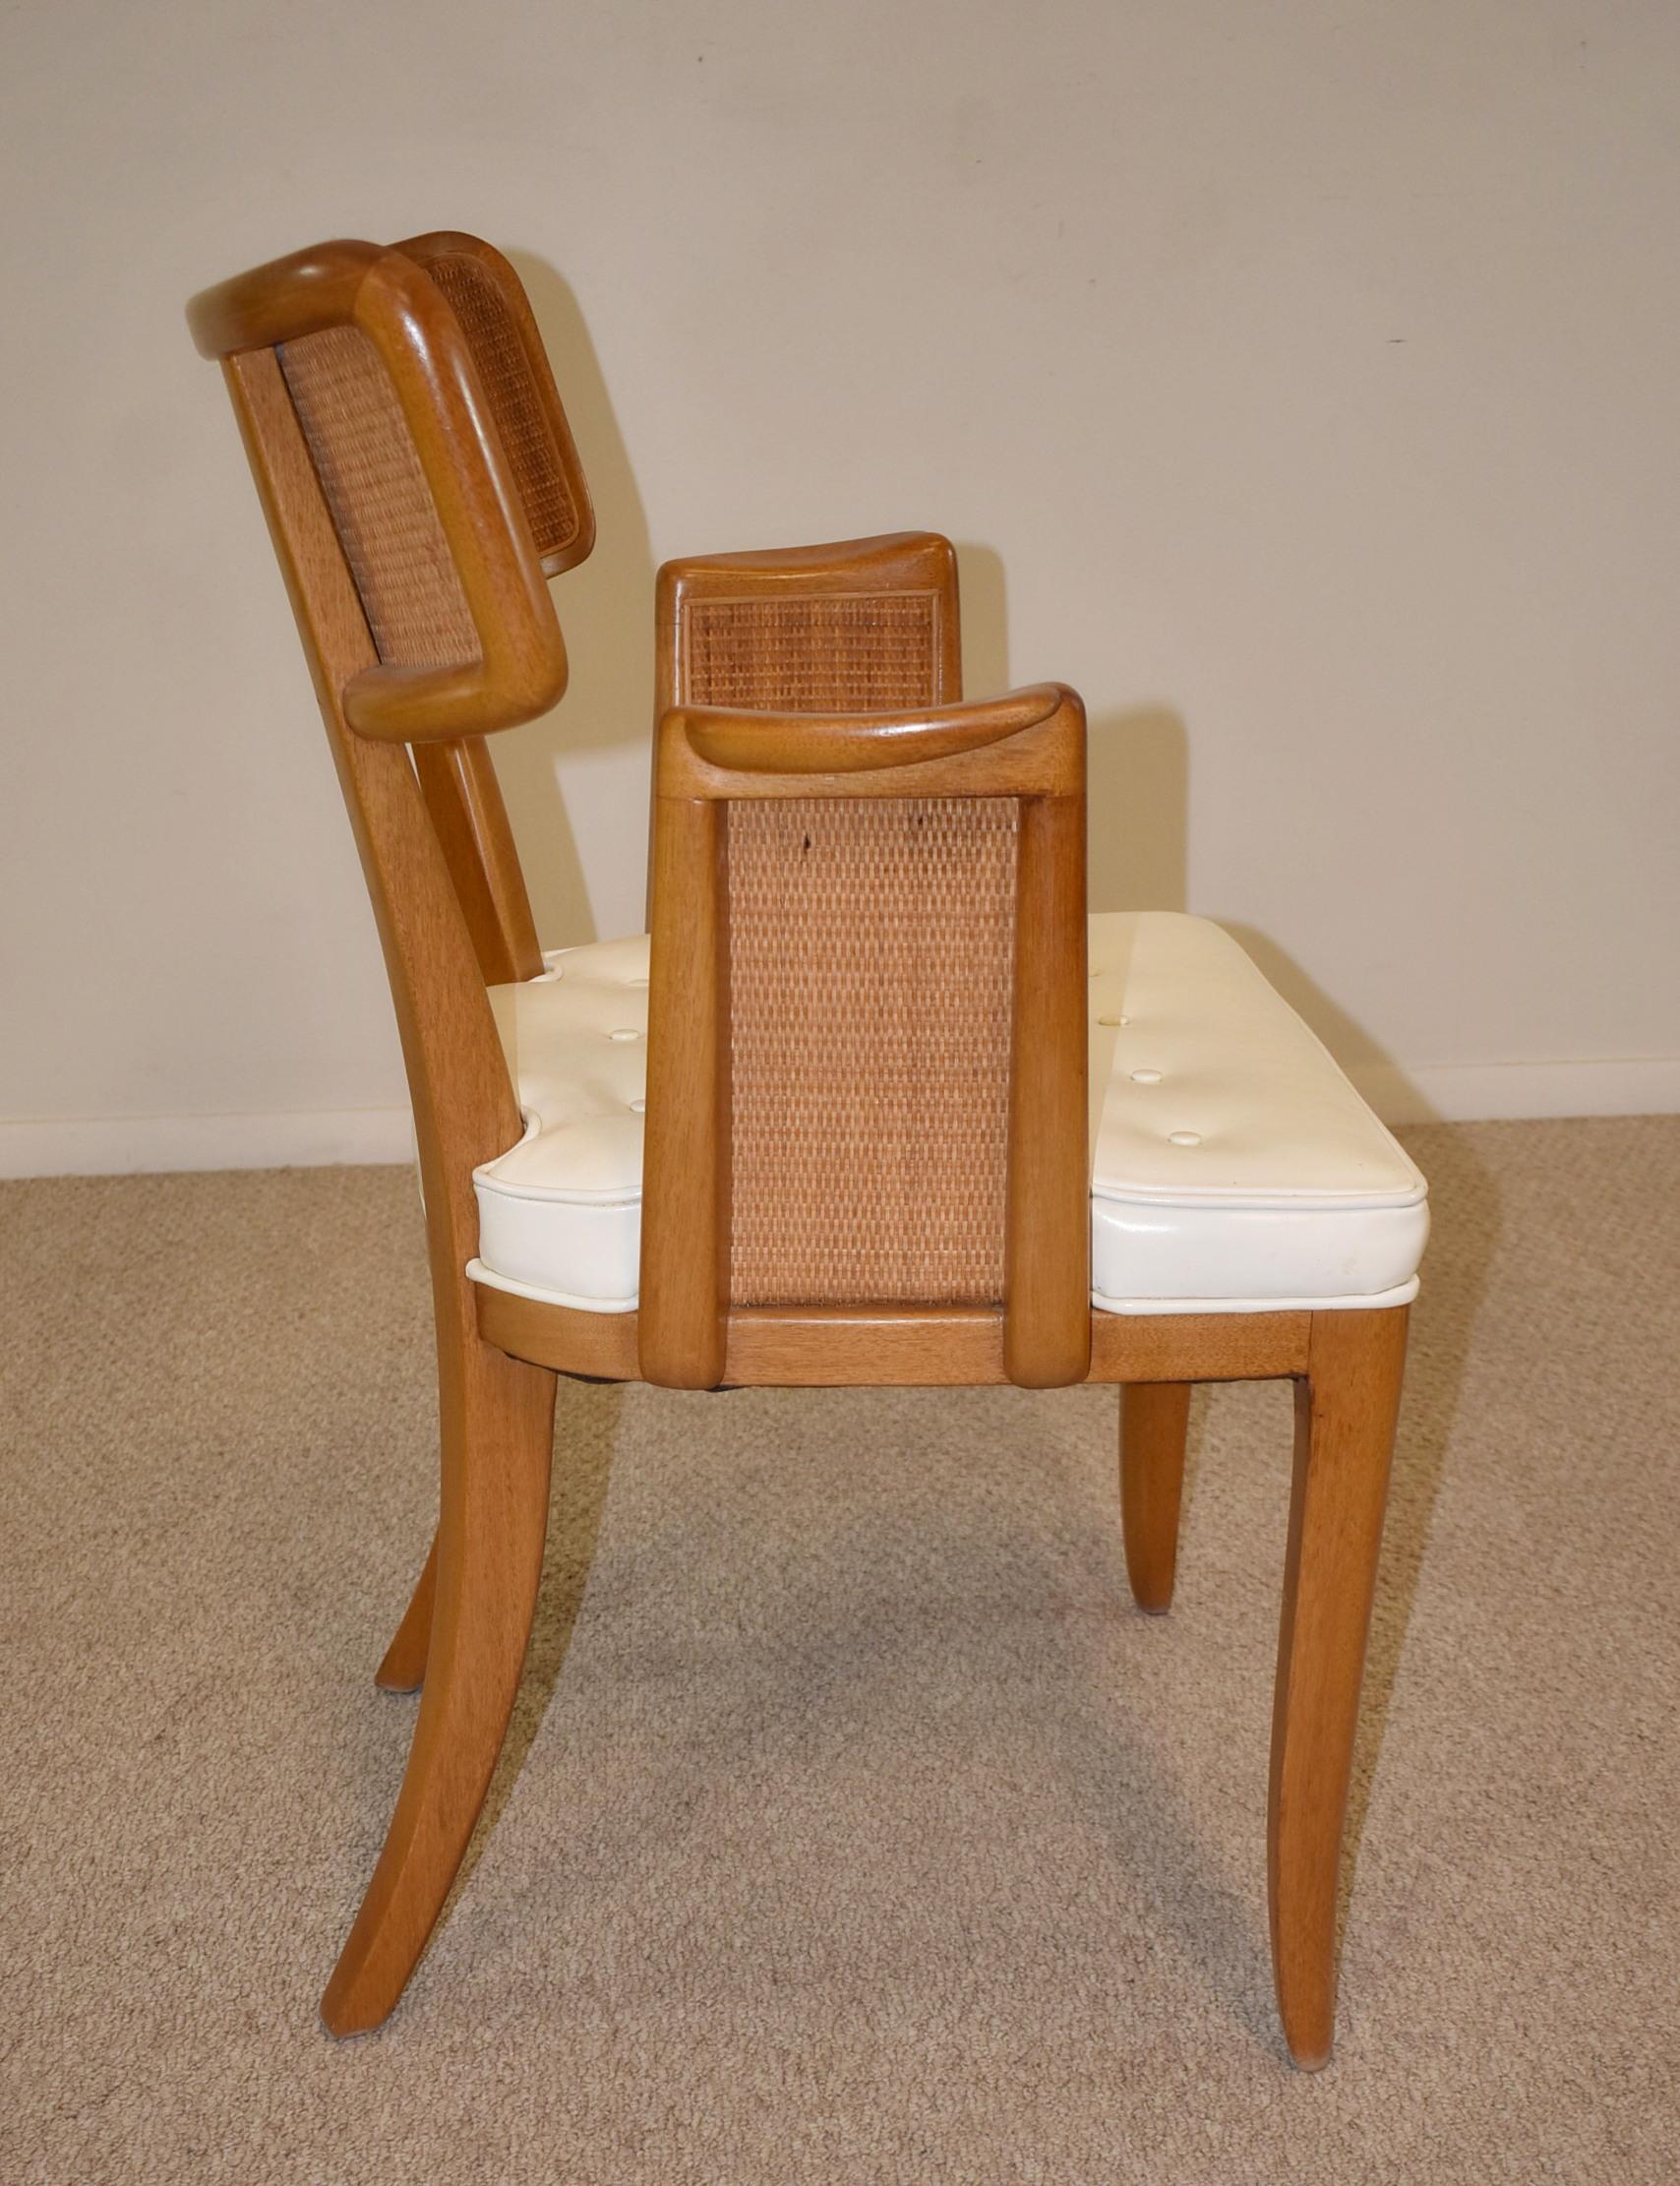 Six Vintage Dunbar Dining Chairs Cane Back Edward Wormley Design, circa 1950's For Sale 2